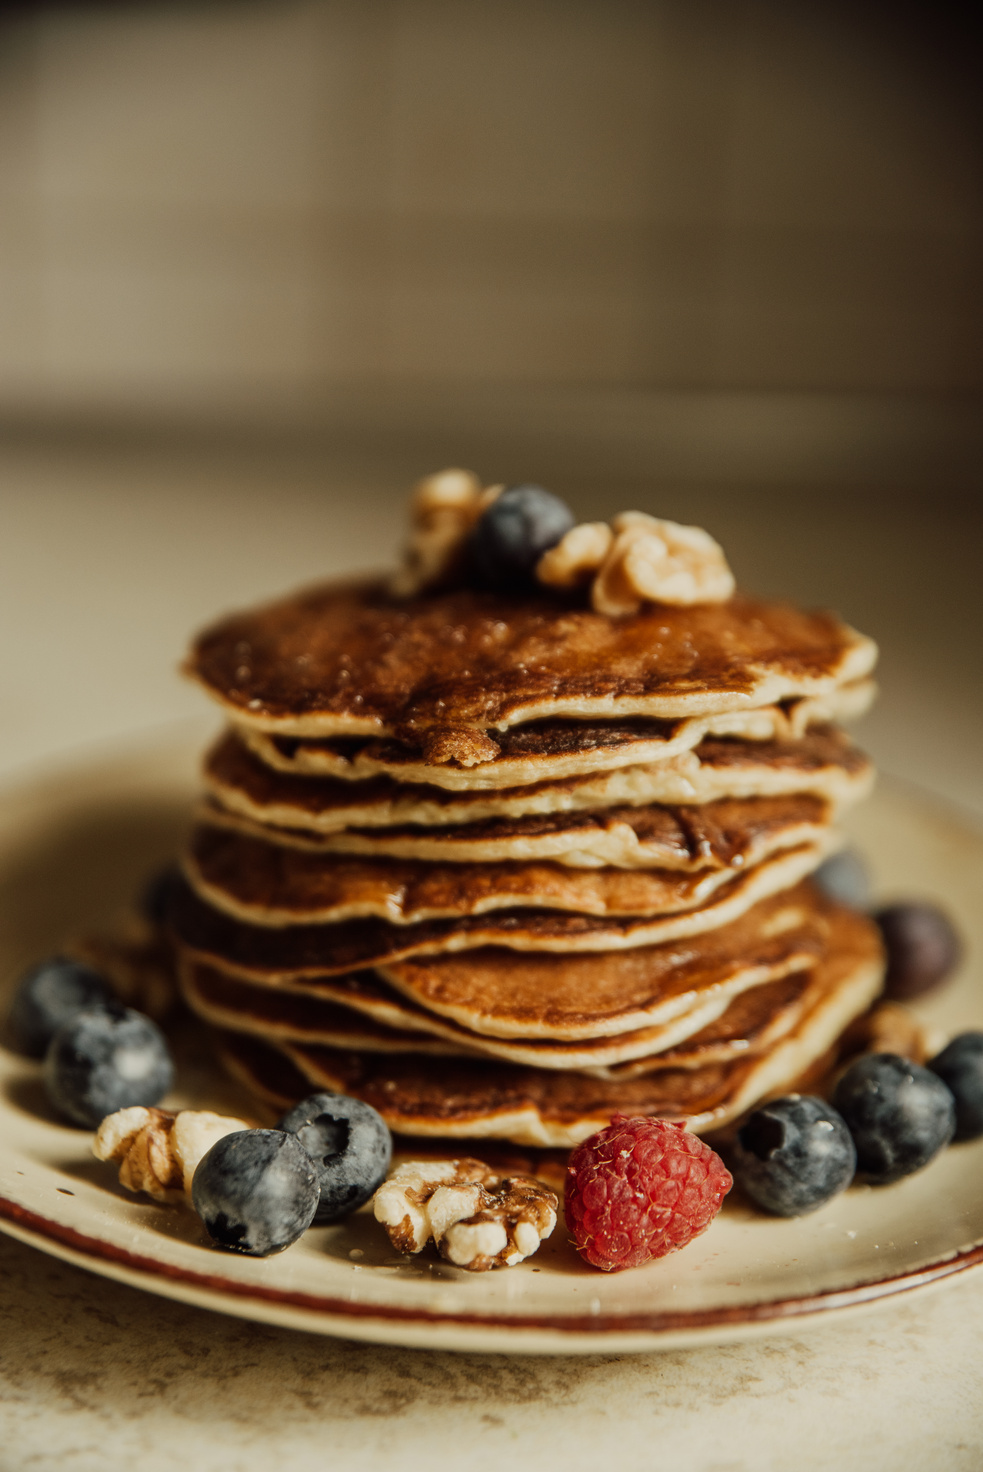 Pancakes With Berries and Walnuts